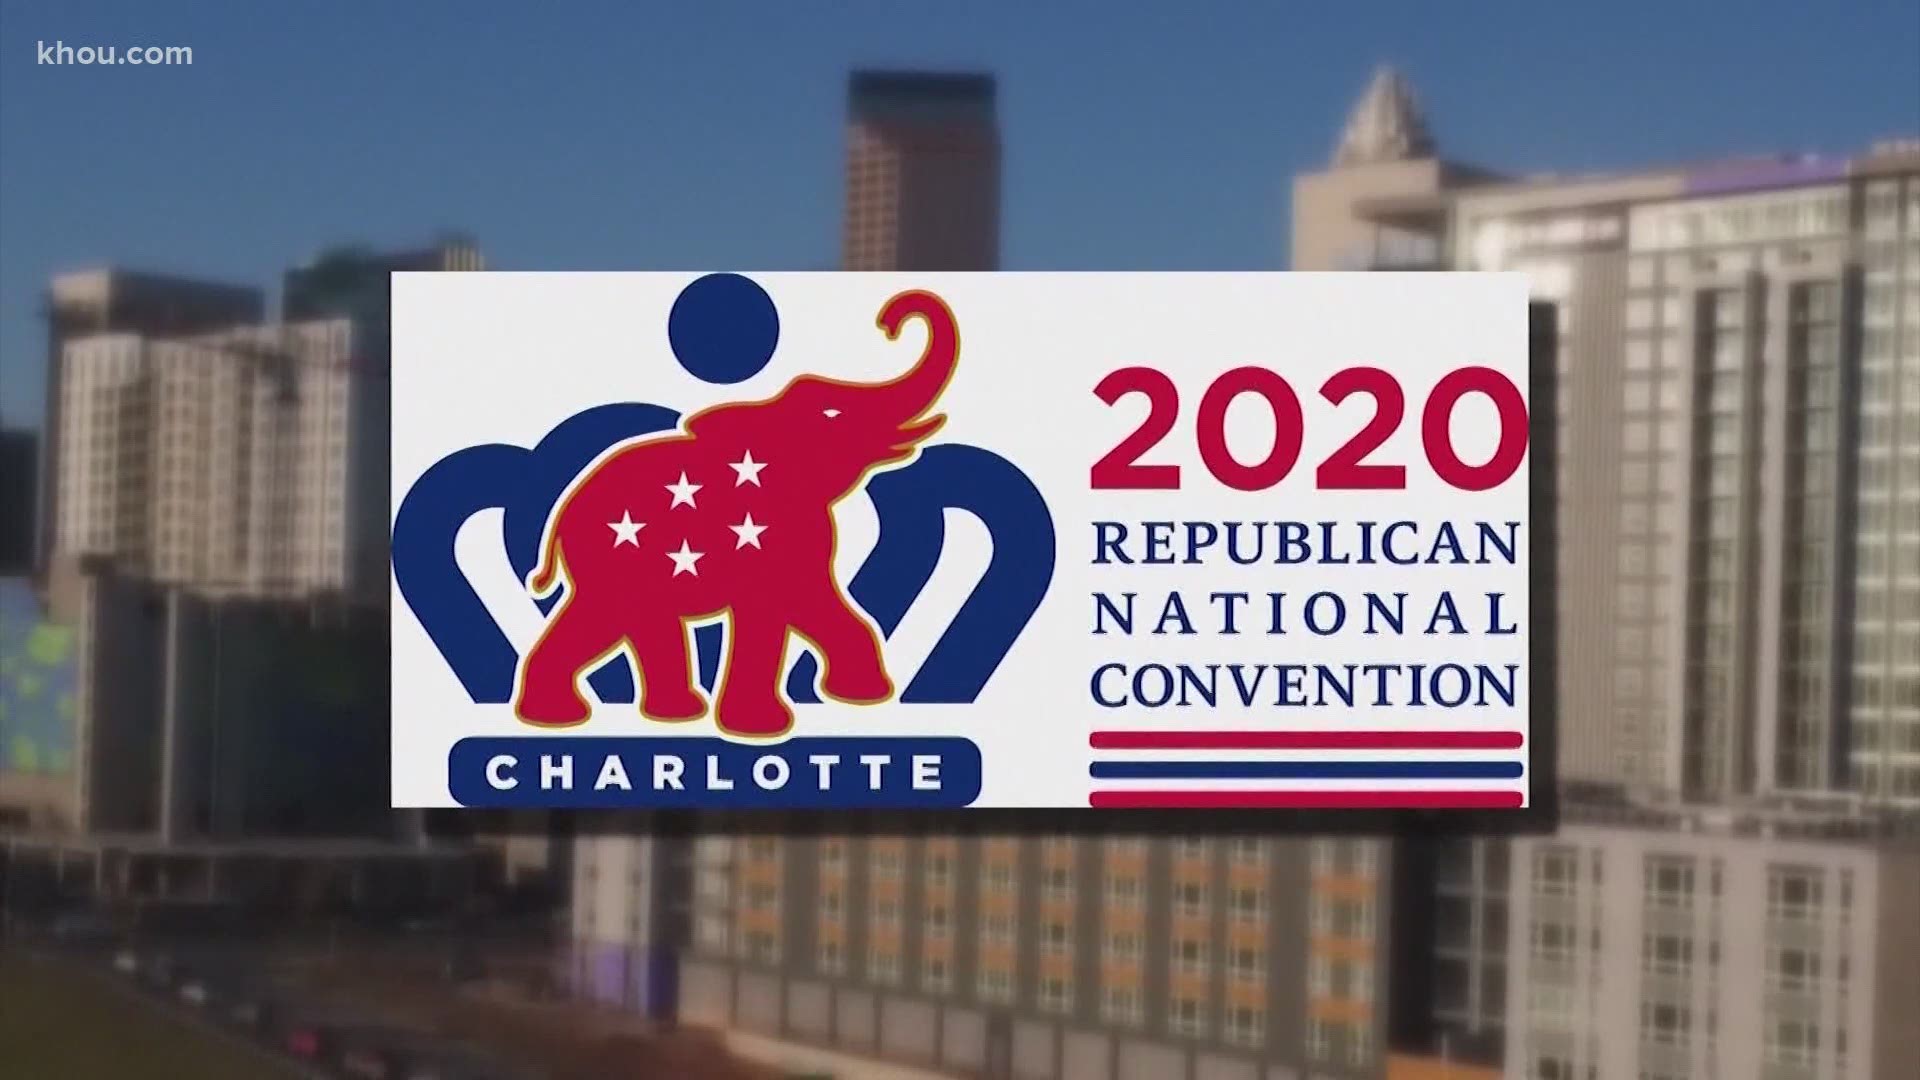 President Trump said if Gov. Roy Cooper can’t guarantee the Republican Party would be allowed to “fully occupy” the convention venue in Charlotte, he'll move it.